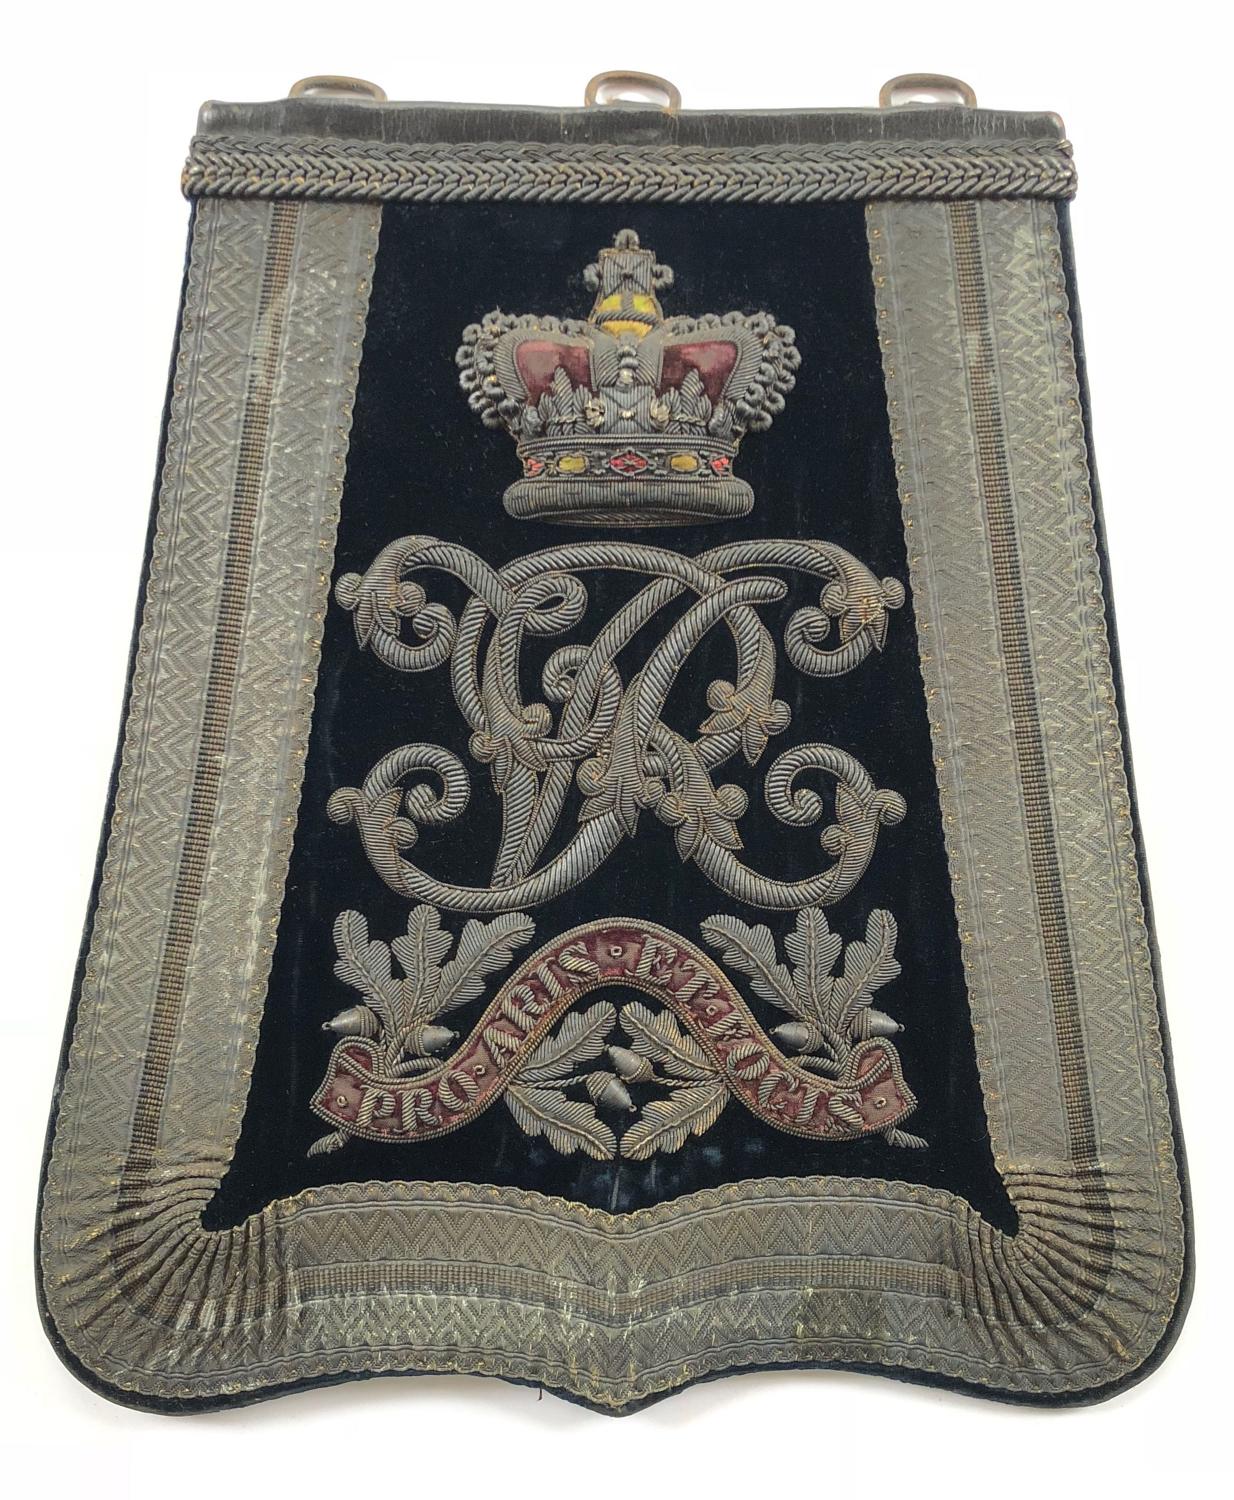 Middlesex Yeomanry Victorian Officer’s Sabretache